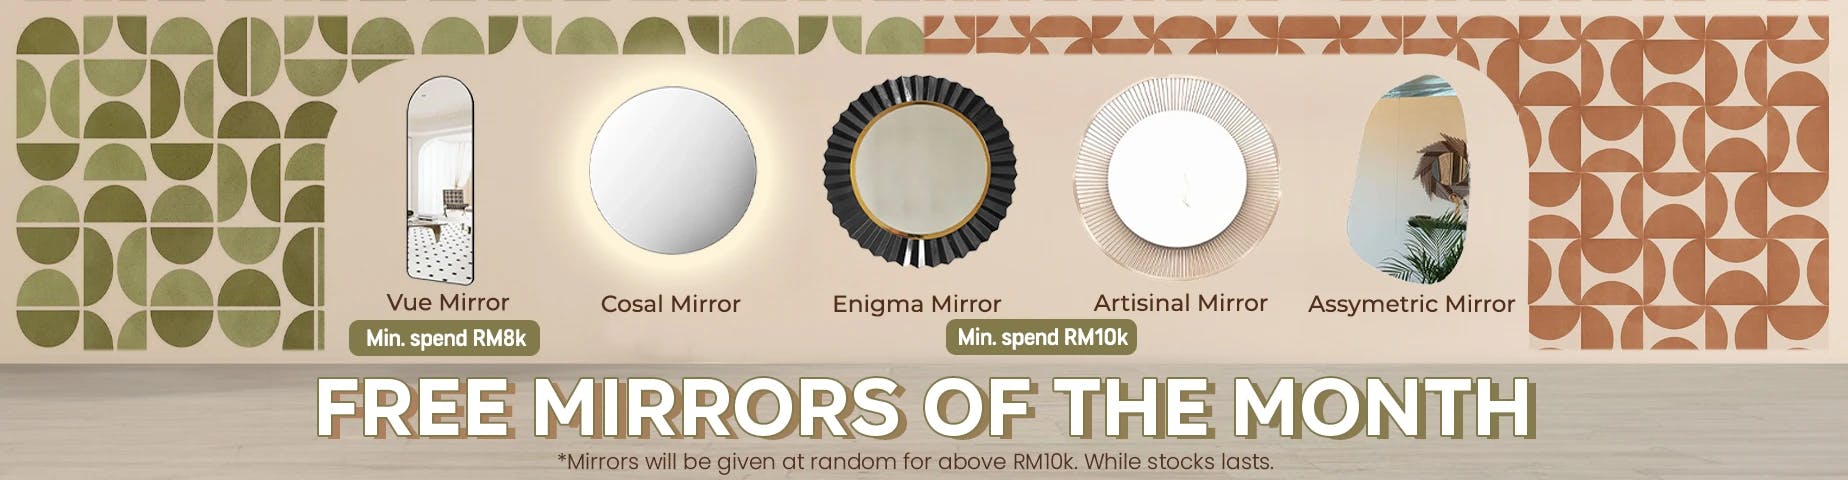 GWP Special Promotion Mirrors